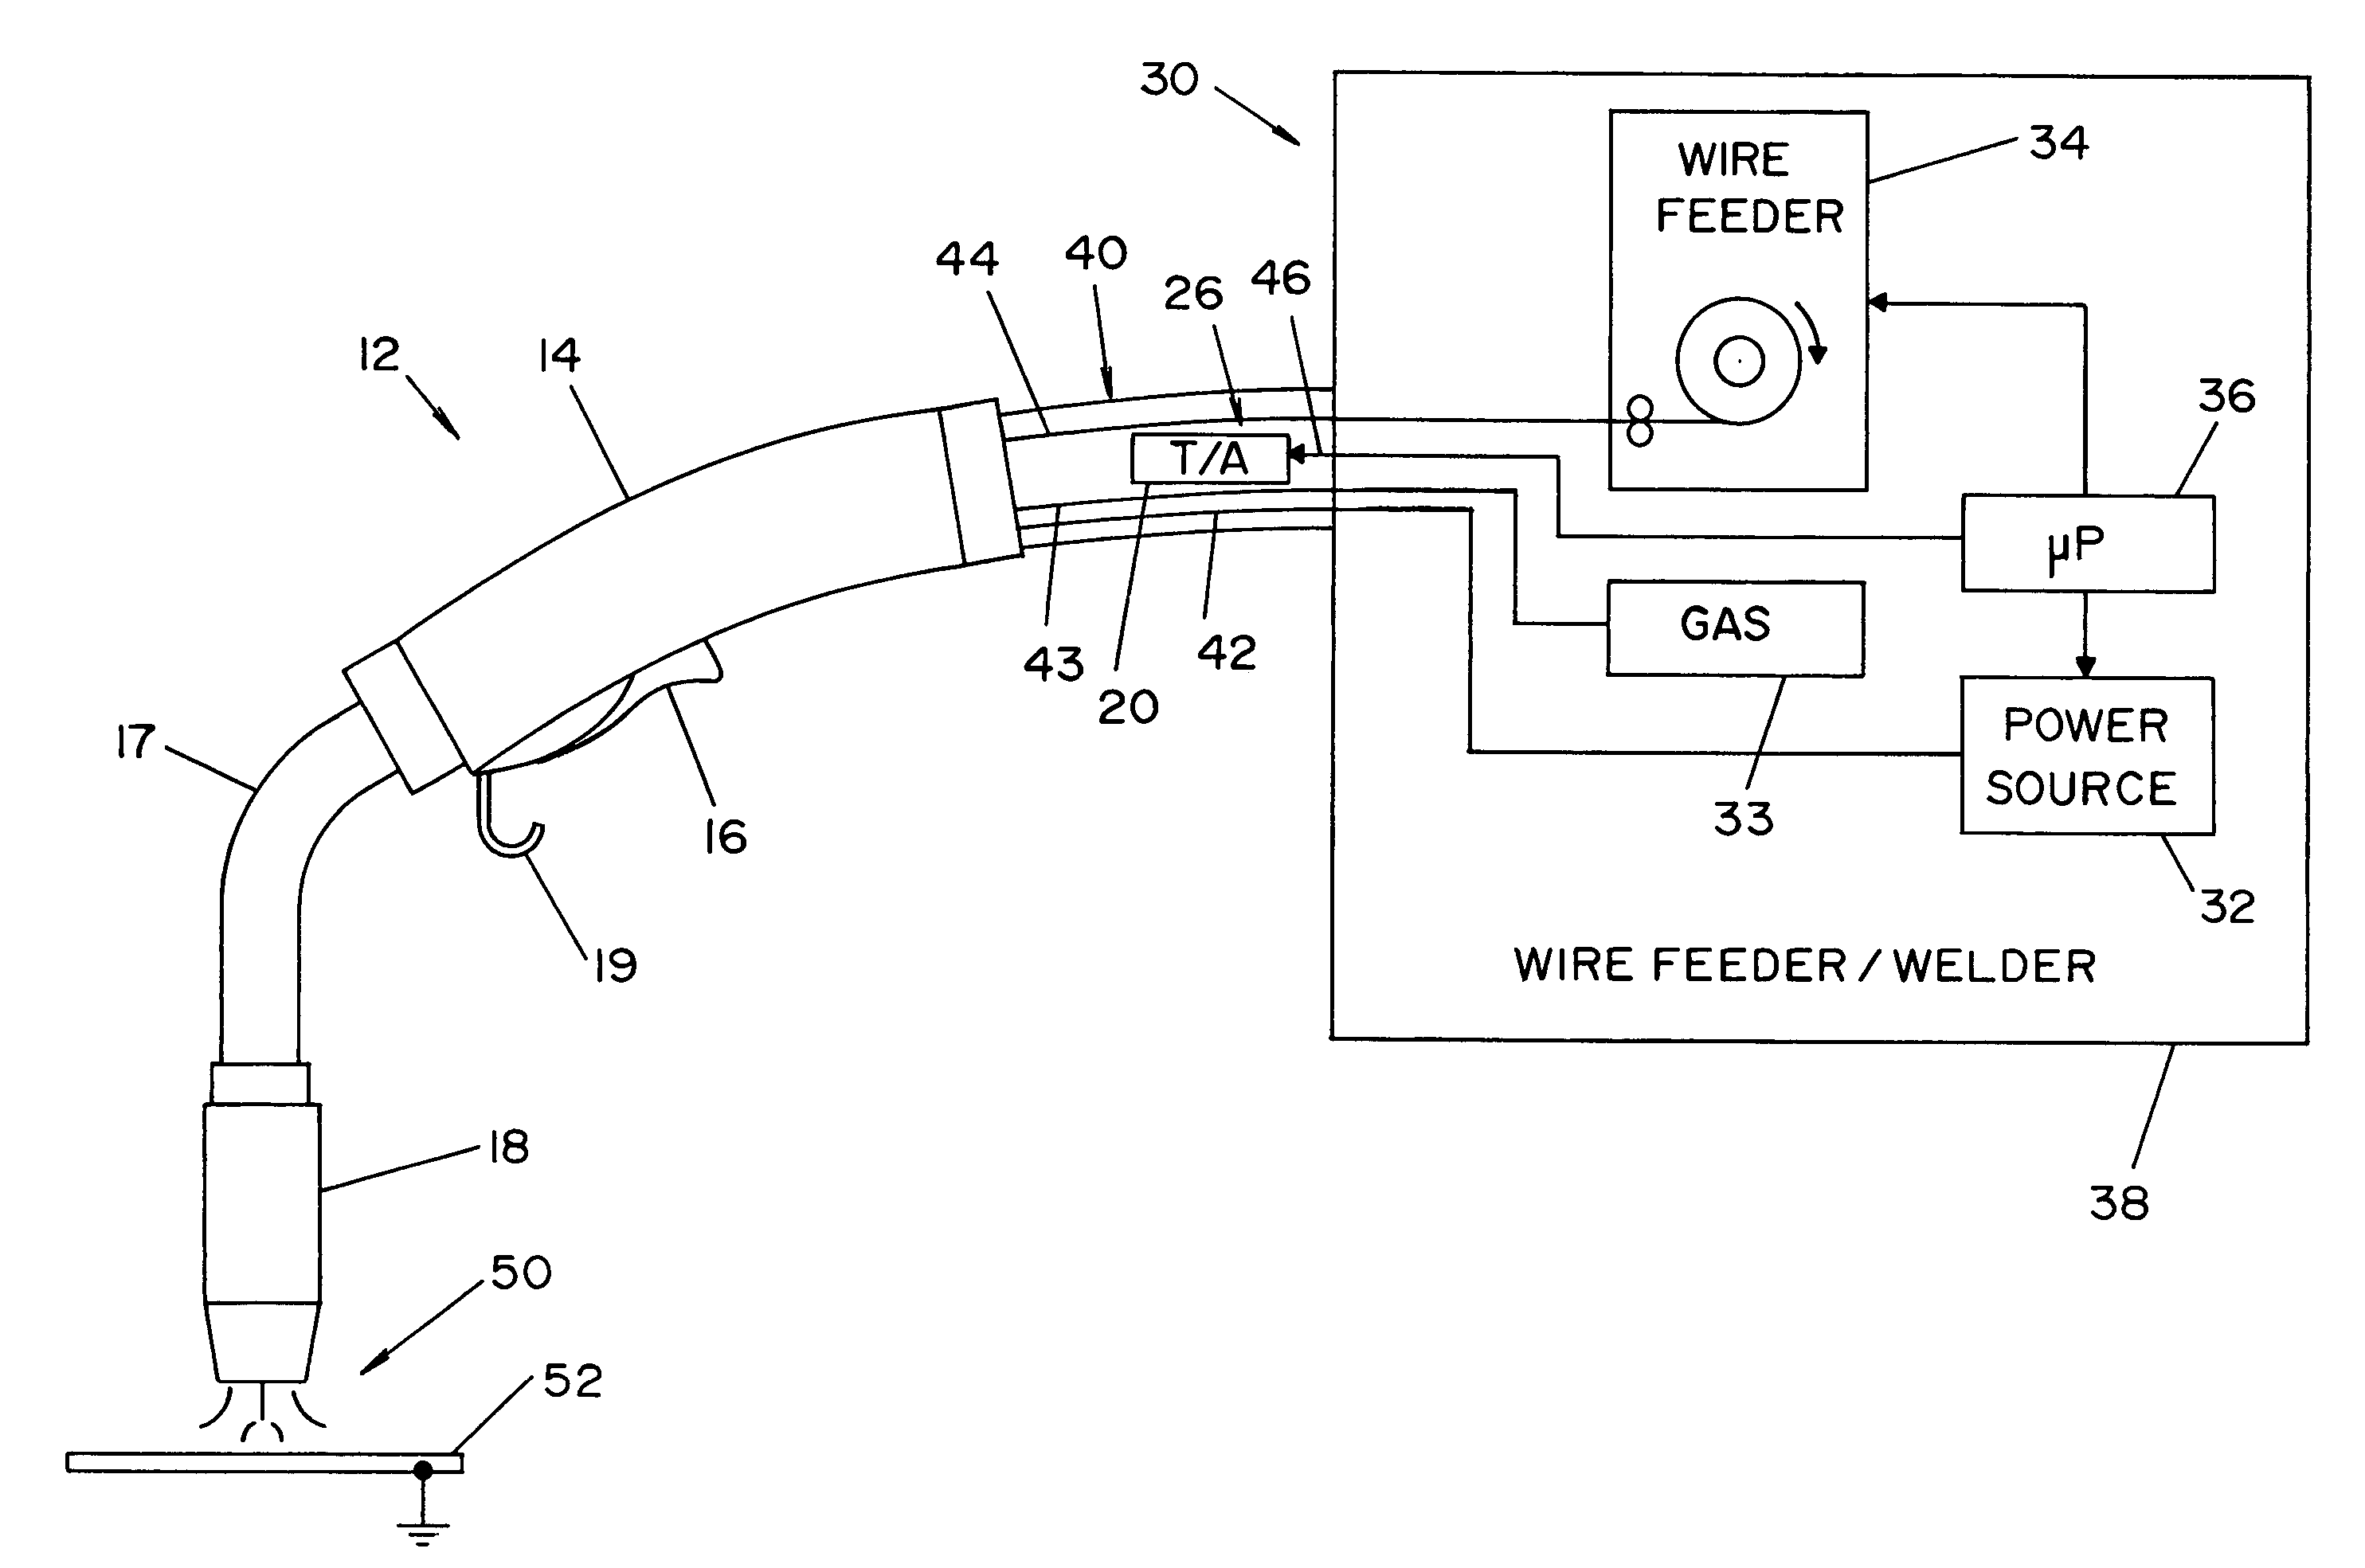 Methods and apparatus for tactile communication in an arc processing system